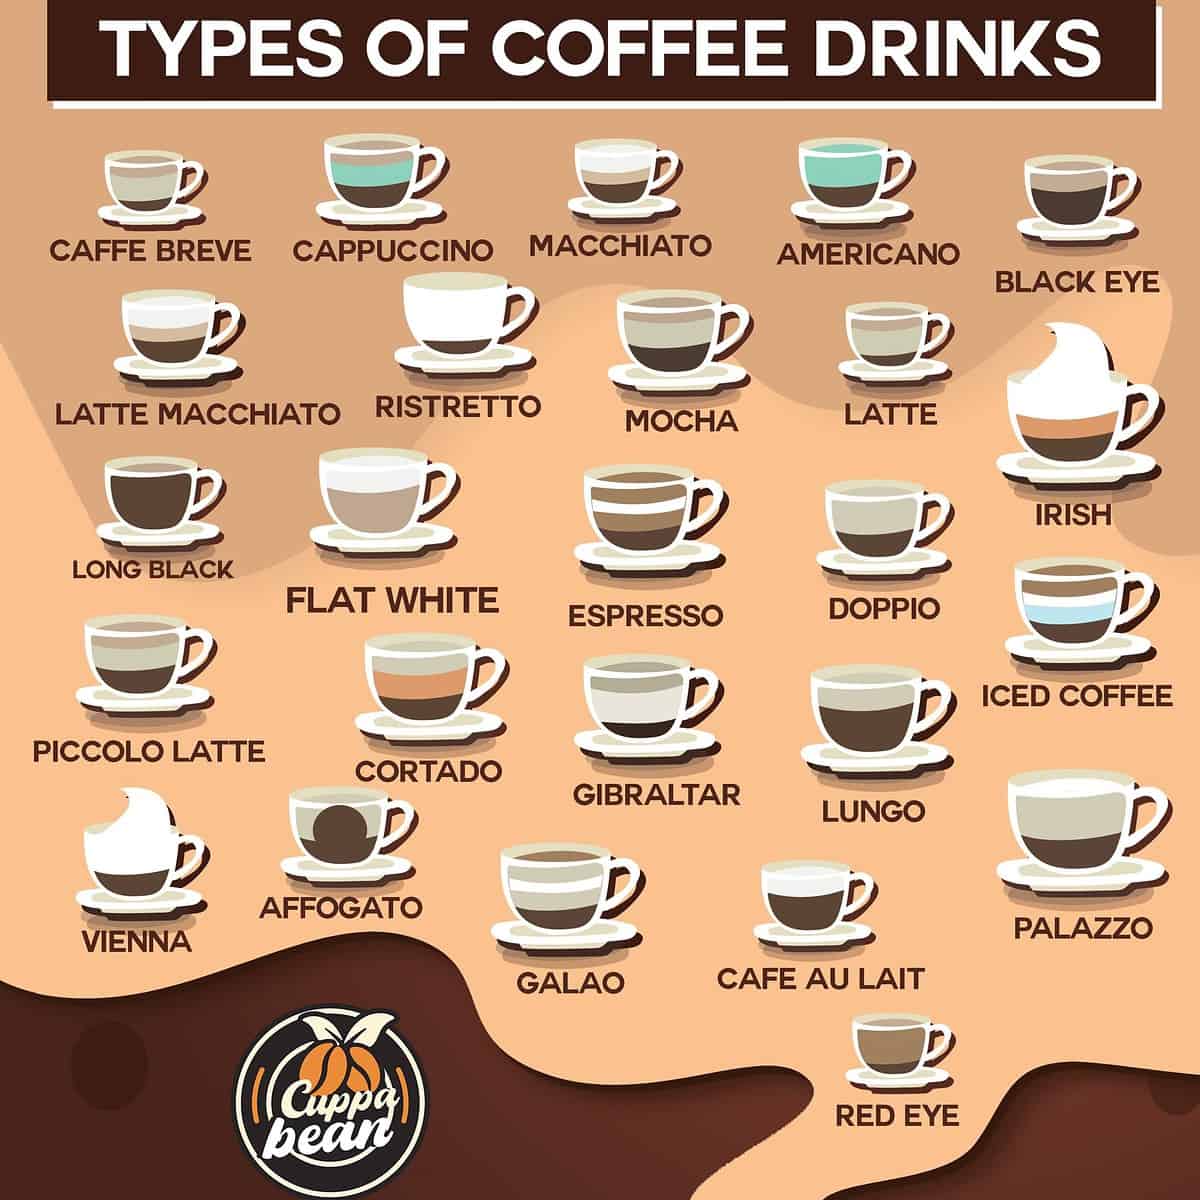 coffee drink types explained